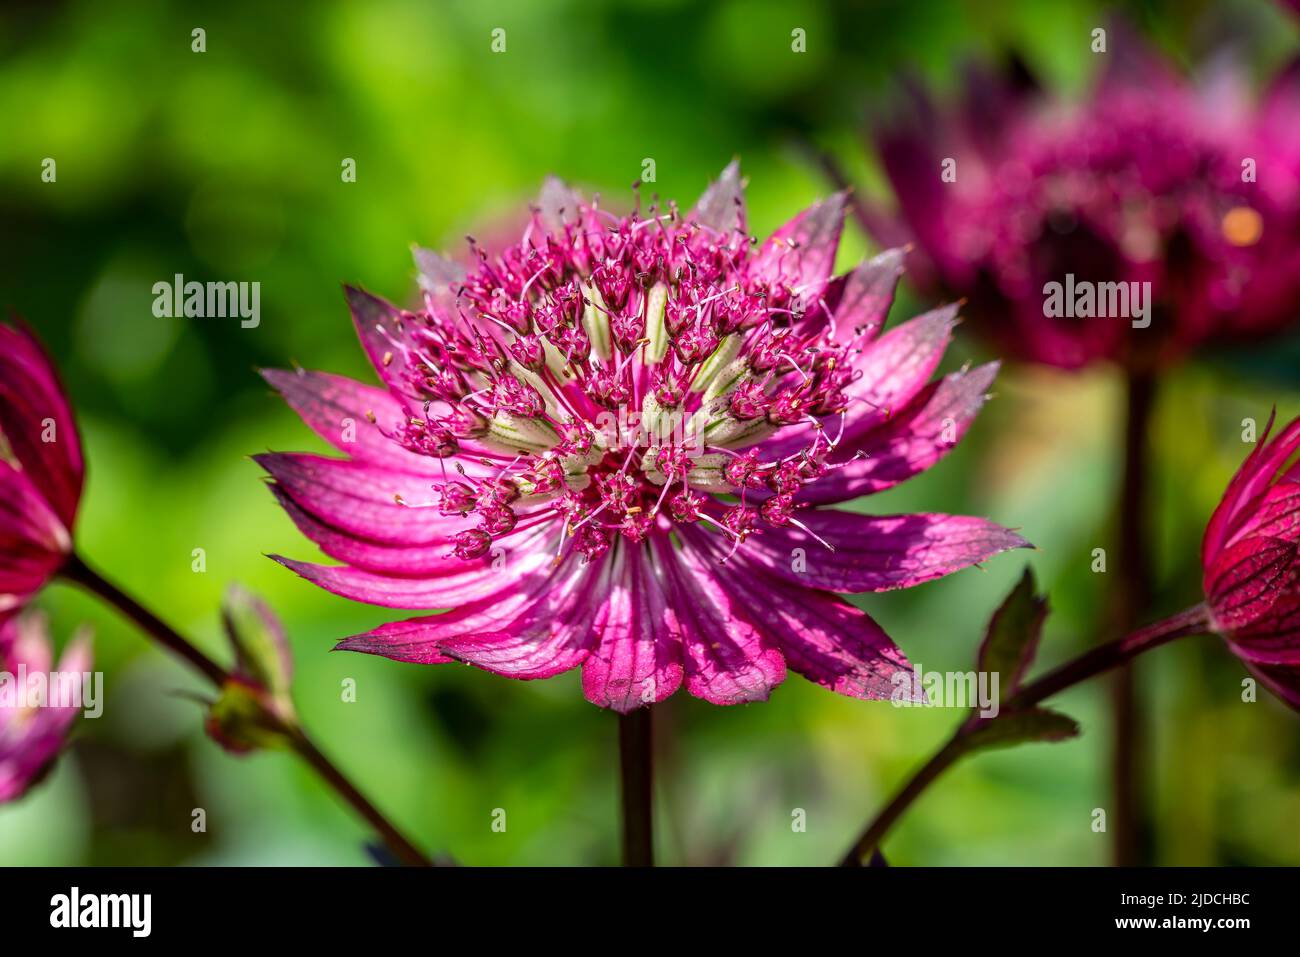 Astrantia major Gill Richardson Group a summer autumn fall flowering plant with a crimson red summertime flower commonly known as great black masterwo Stock Photo